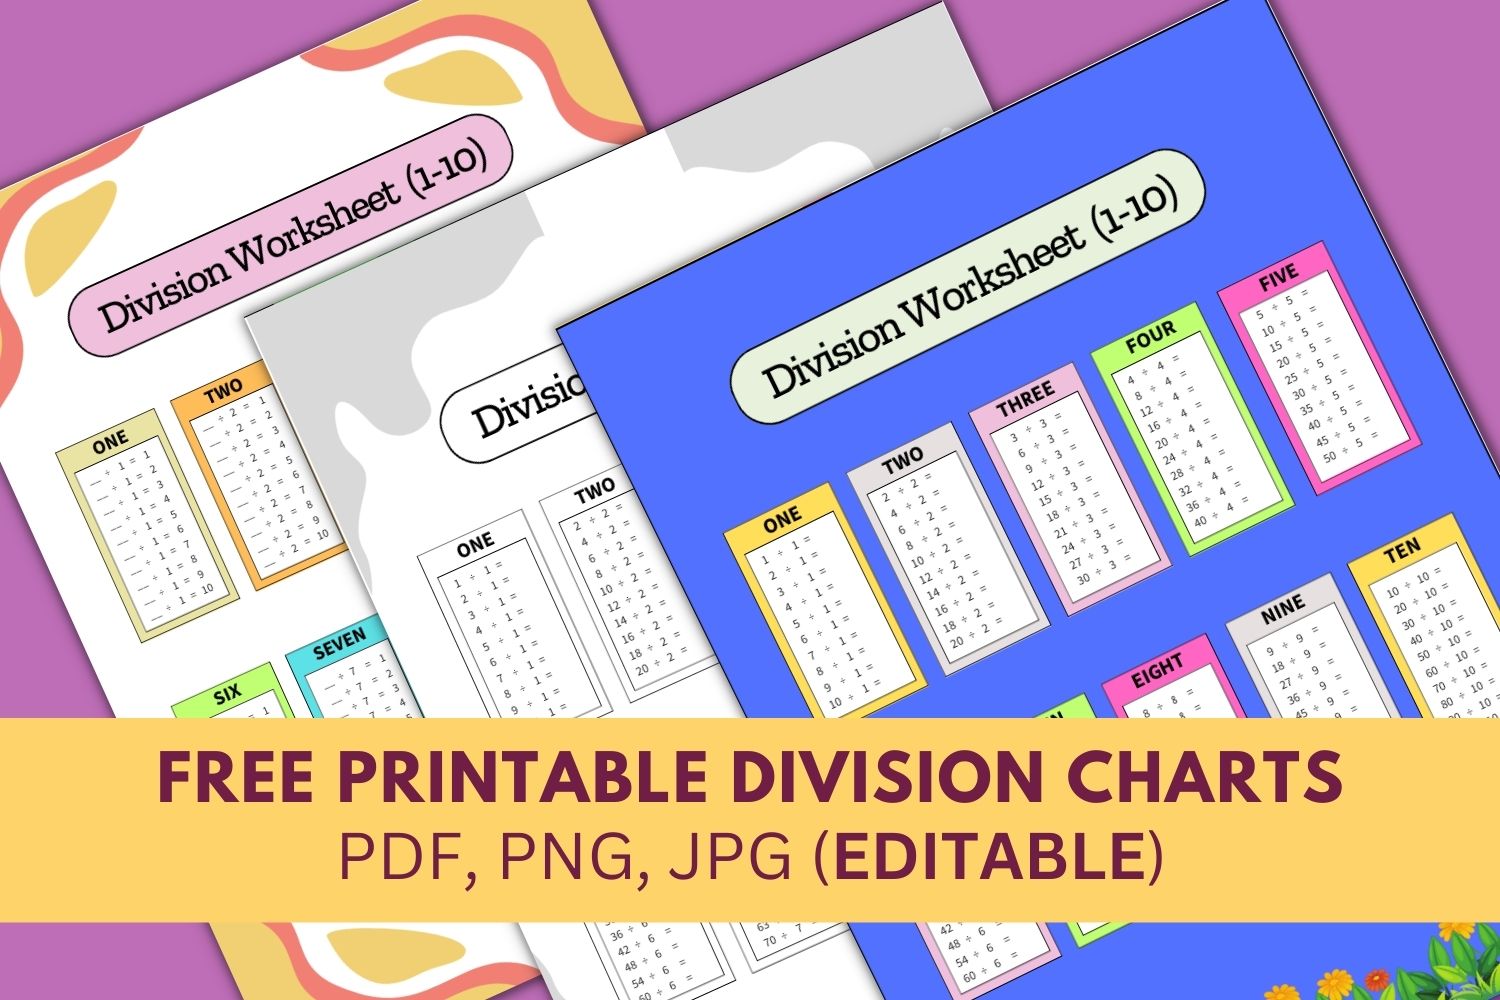 Free printable division chart, math table worksheets, sheet, pdf, blank, empty, 3rd grade, 4th grade, 5th grade, template, print, download, online.